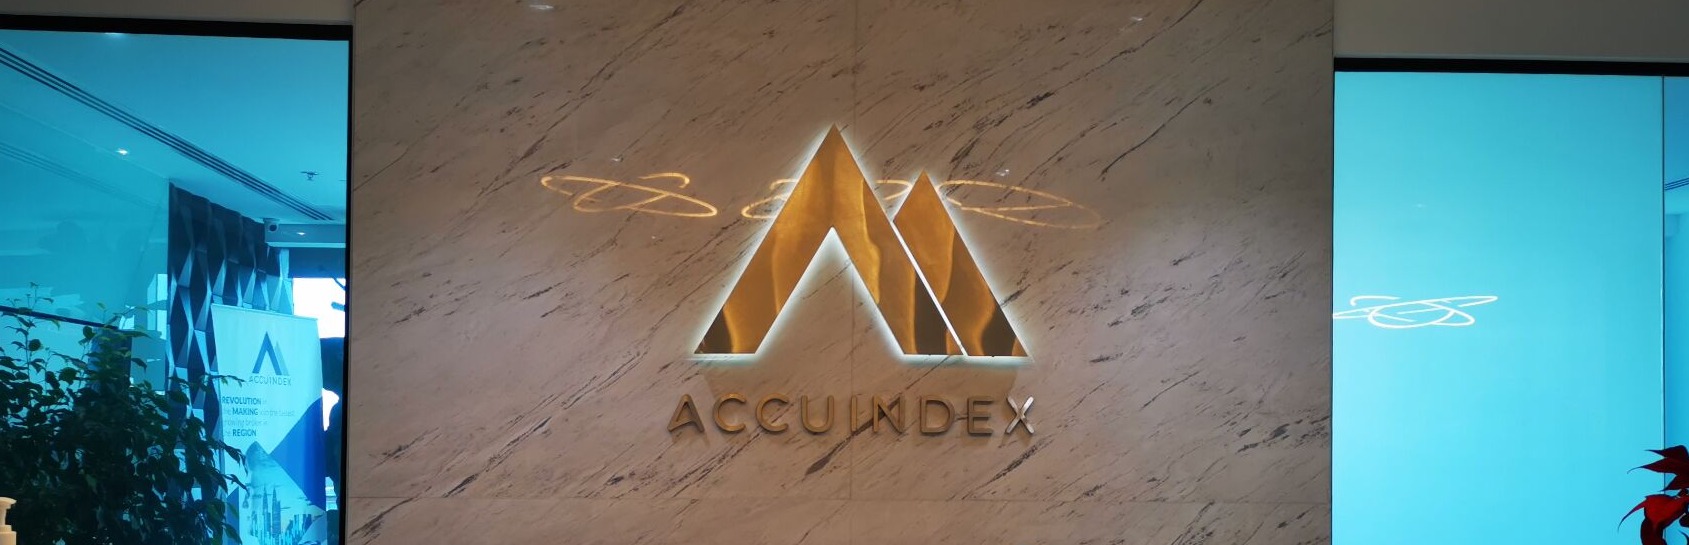 Accuindex Limited